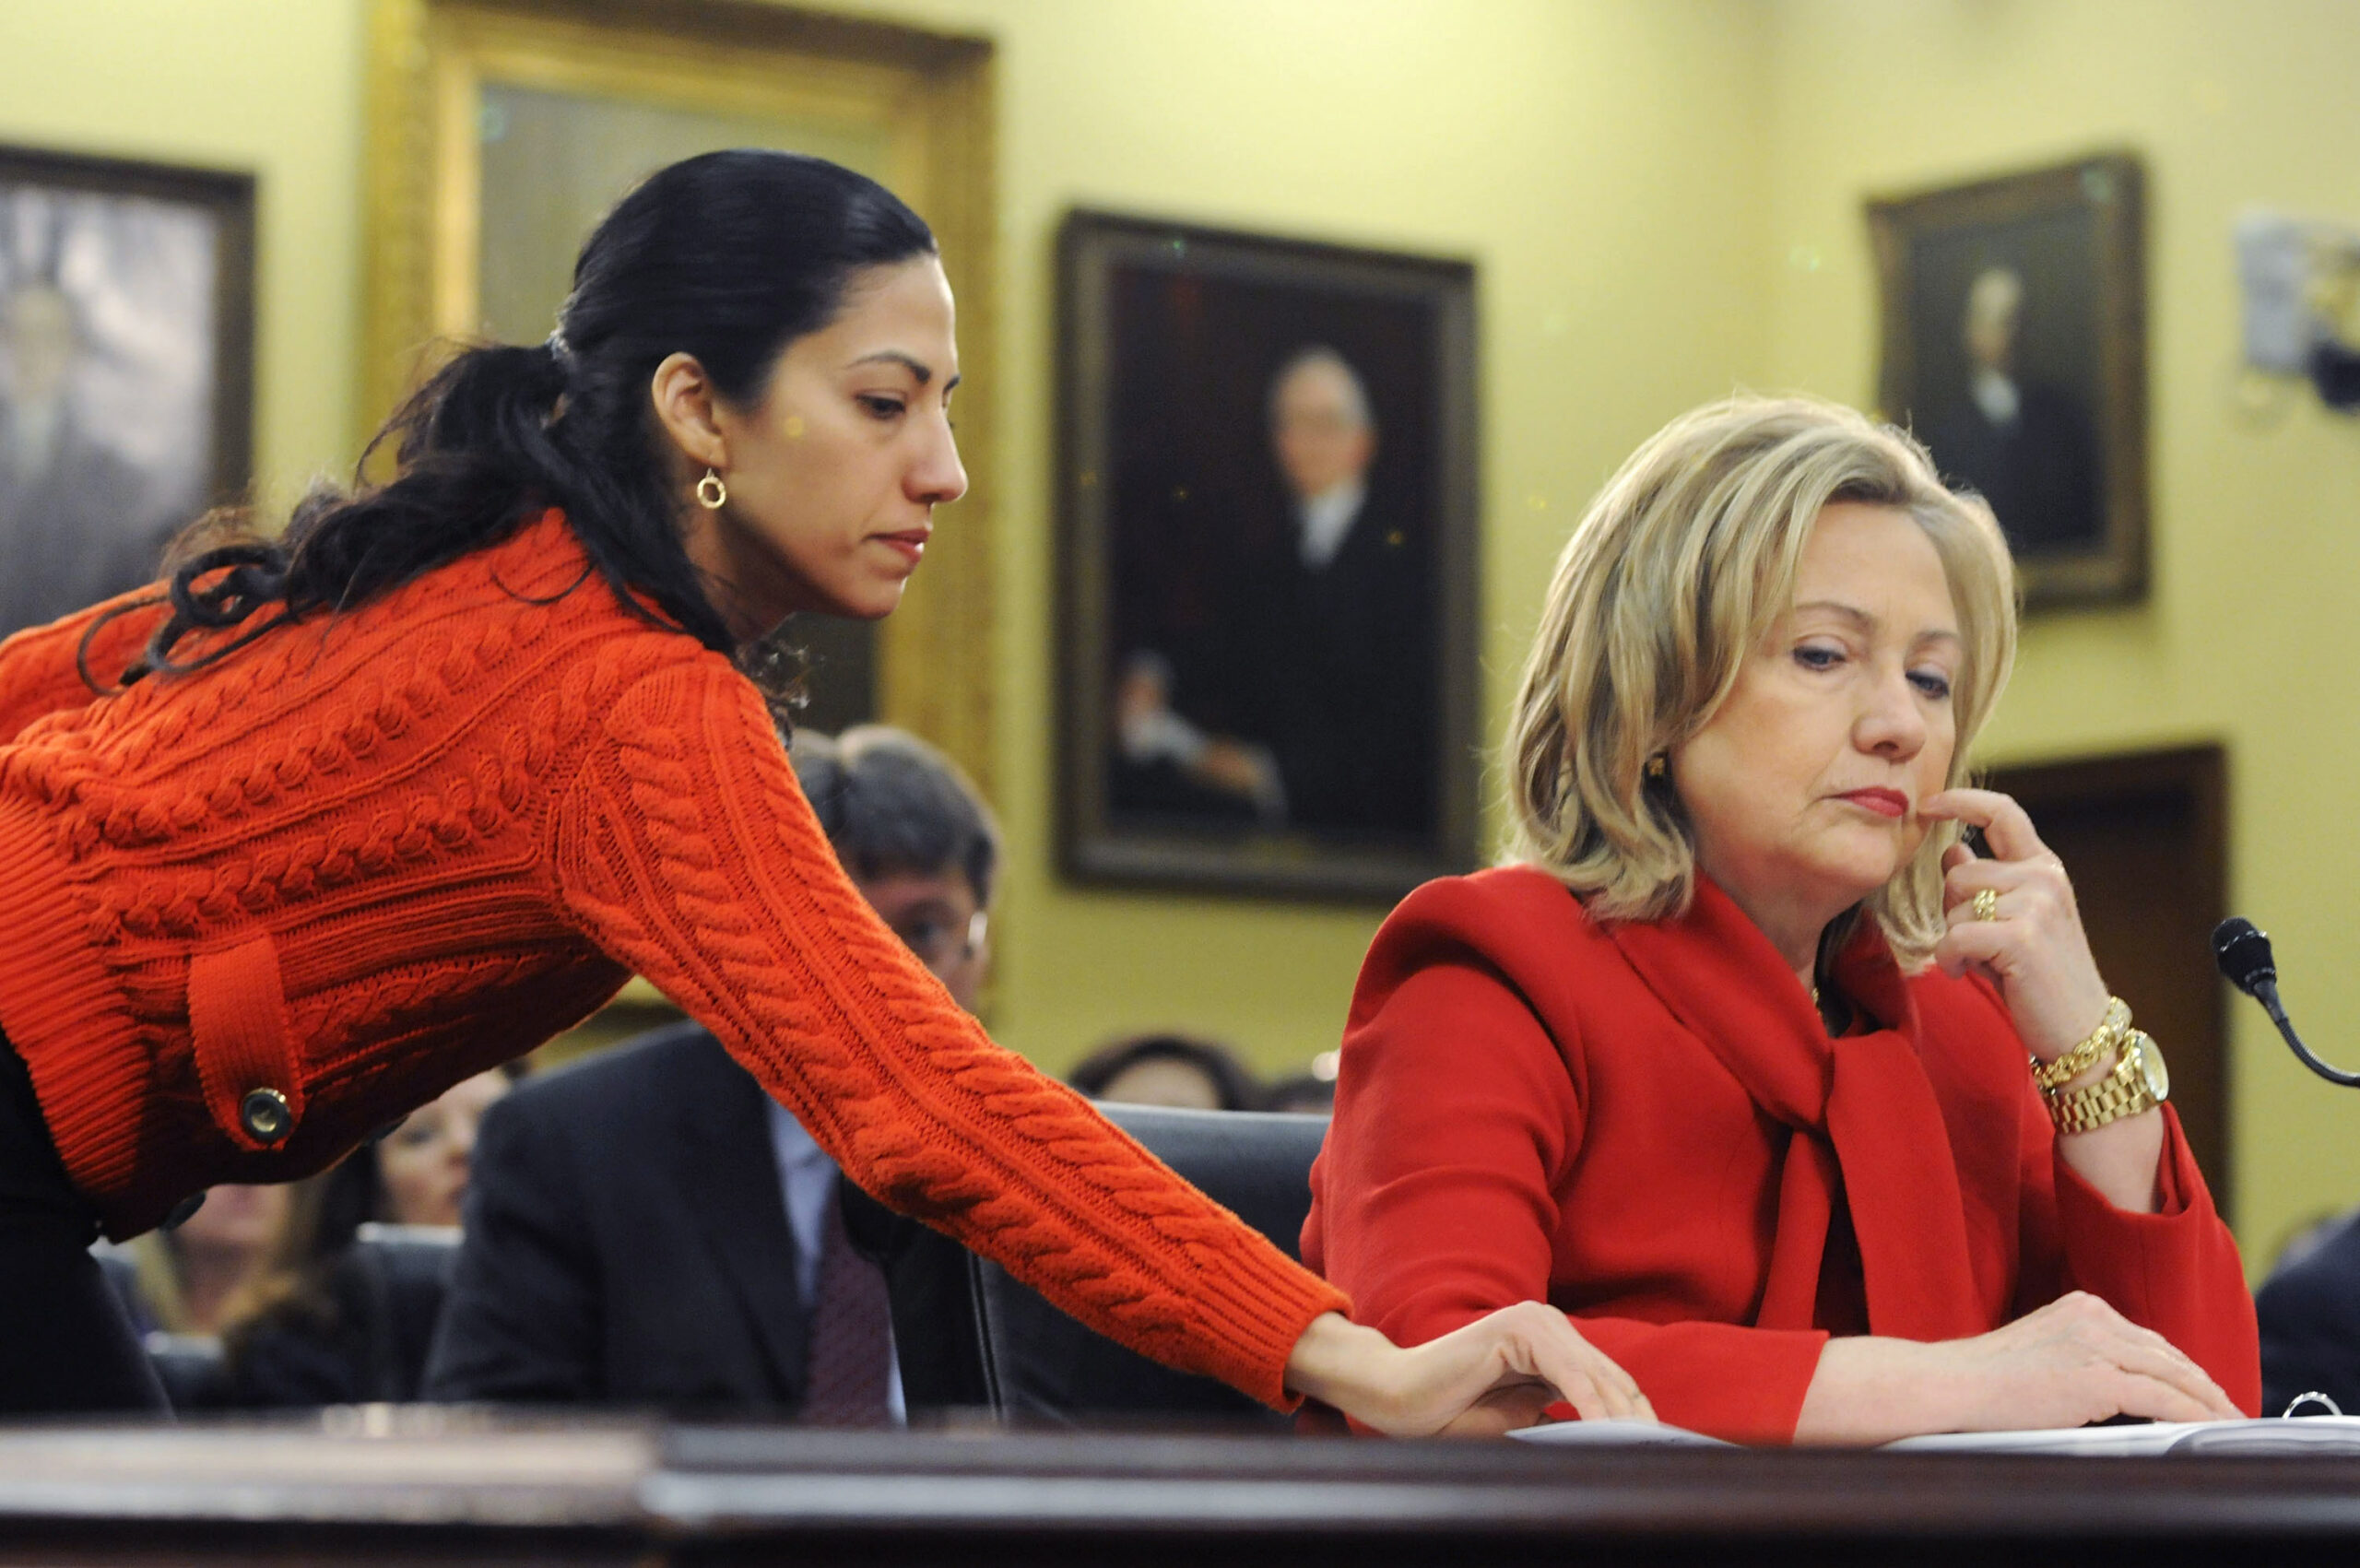 New documents suggest Clinton’s email server may have crashed